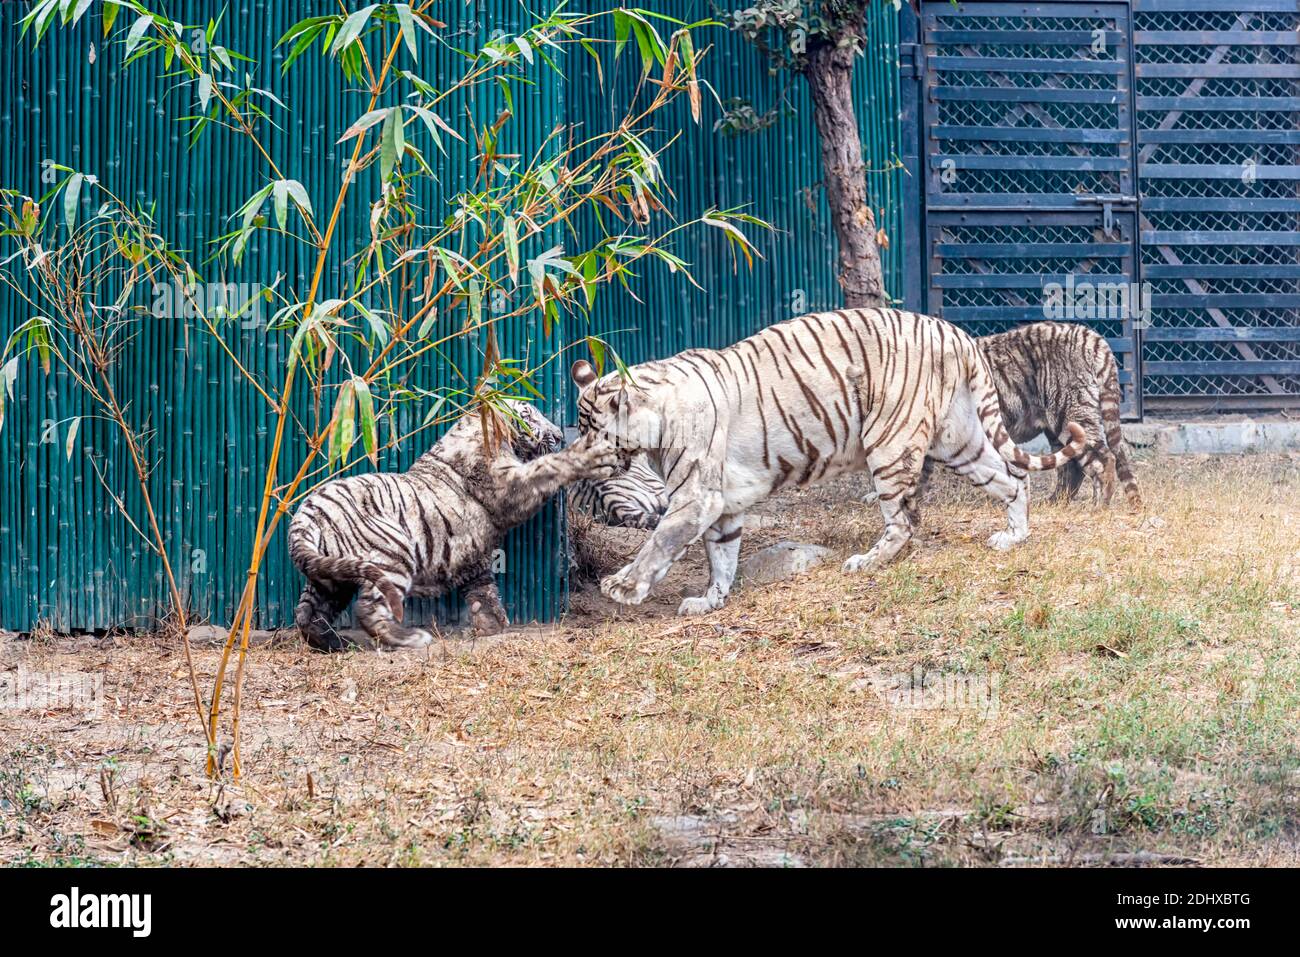 A female white tiger playing with her cubs inside the tiger enclosure at the National Zoological Park Delhi, also known as the Delhi Zoo. Stock Photo